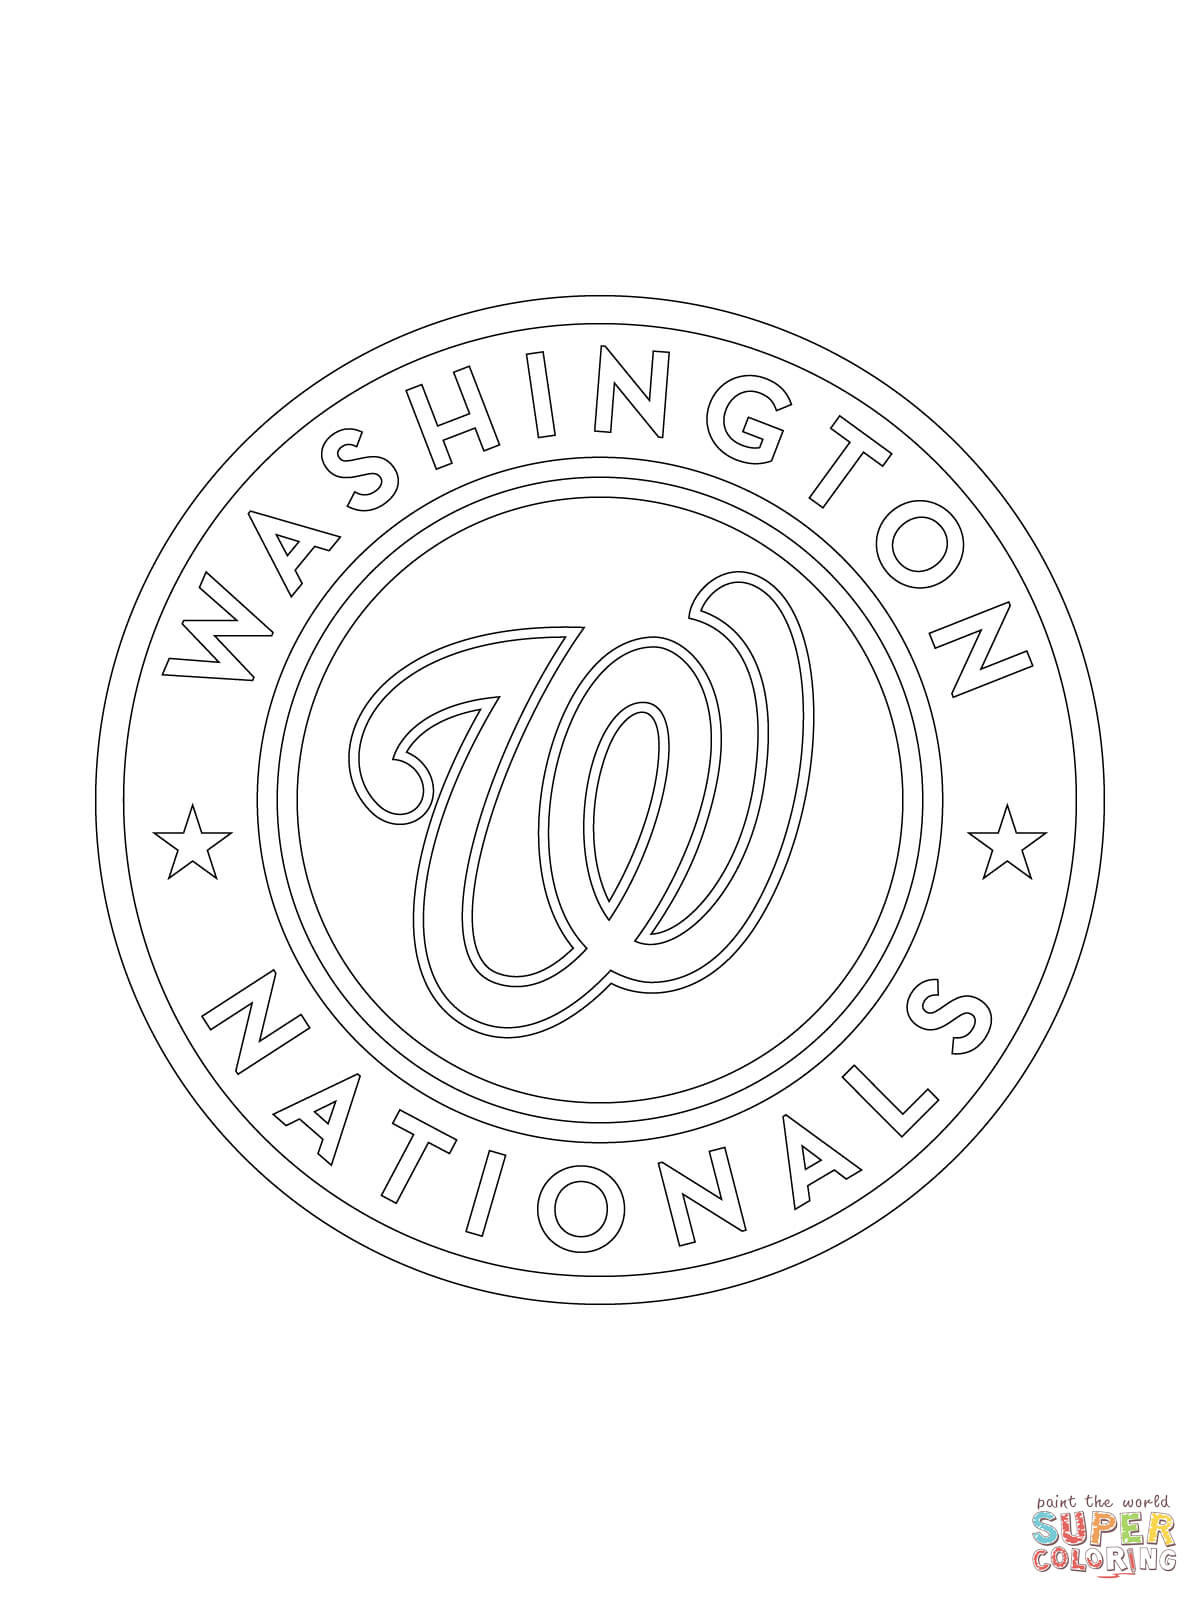 Nationals Washington Dc Coloring Pages Sketch Coloring Page